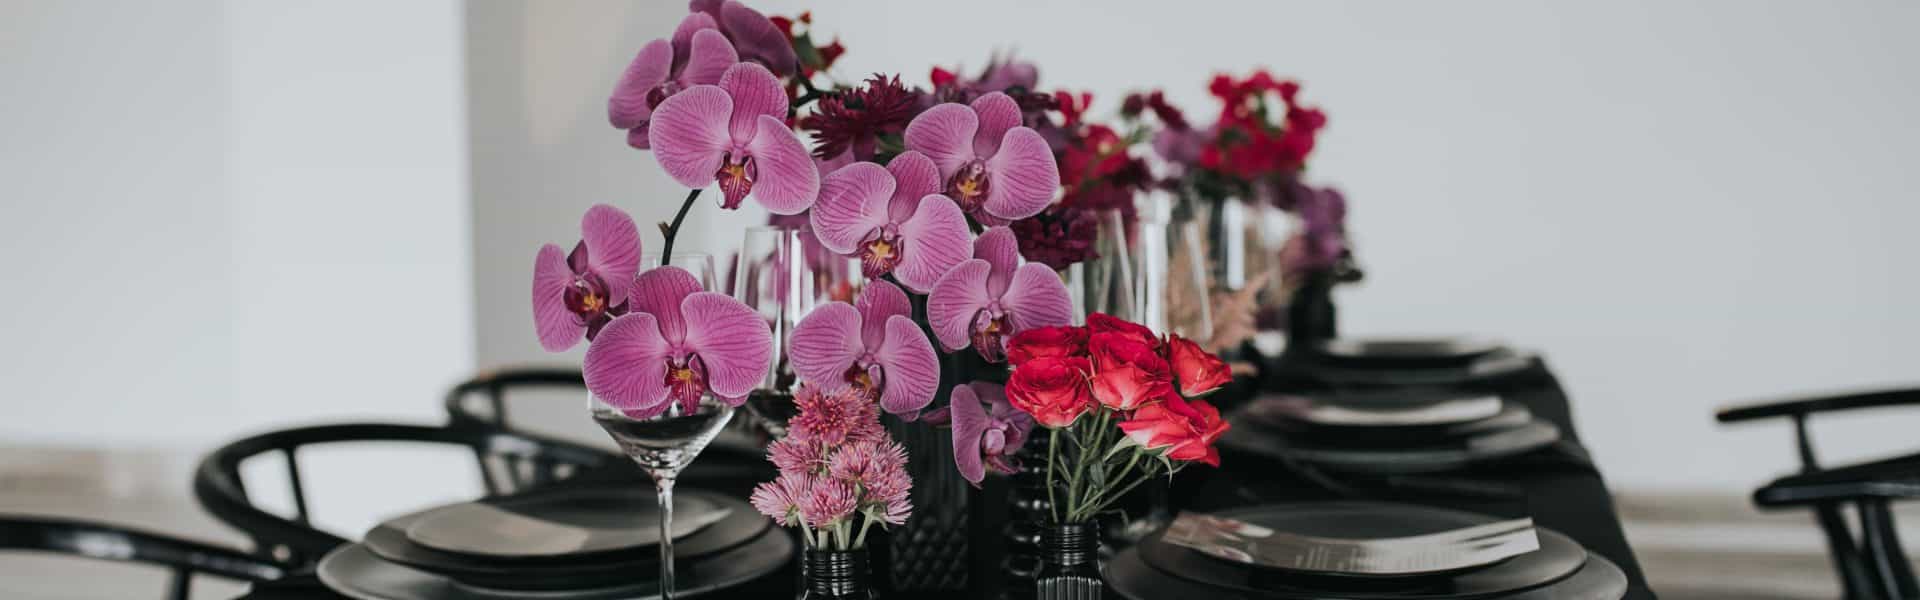 Black table setup with pink flowers